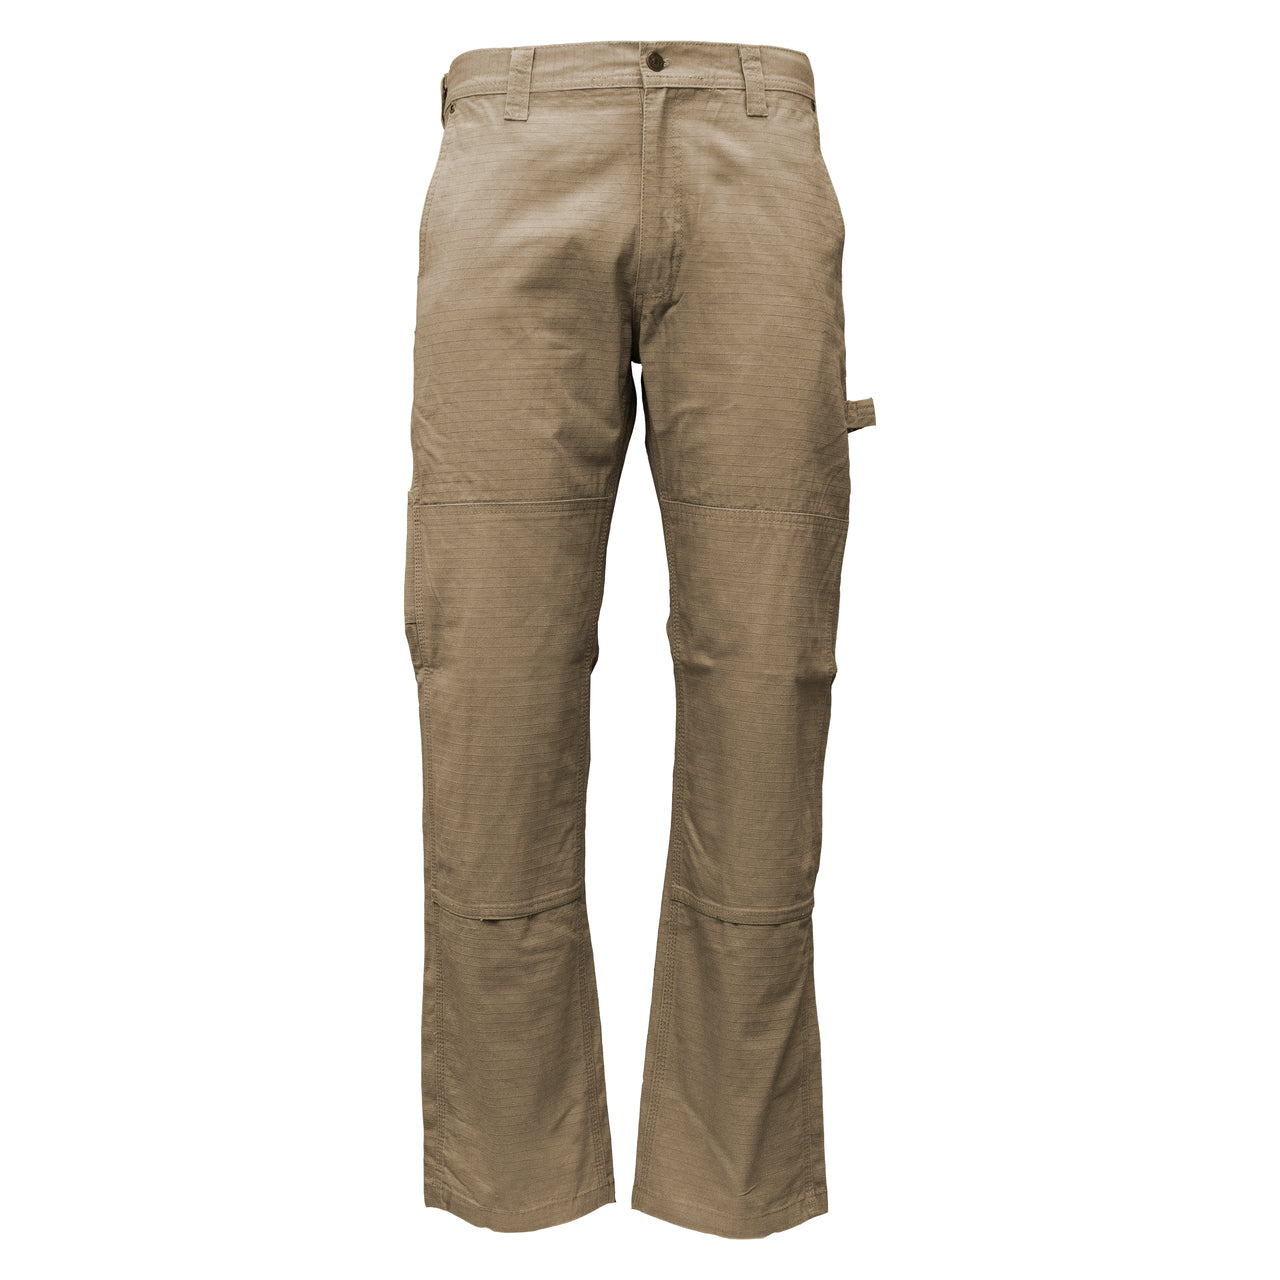 KEY Men's Rip Stop Double-Front Dungaree_Khaki - Work World - Workwear, Work Boots, Safety Gear